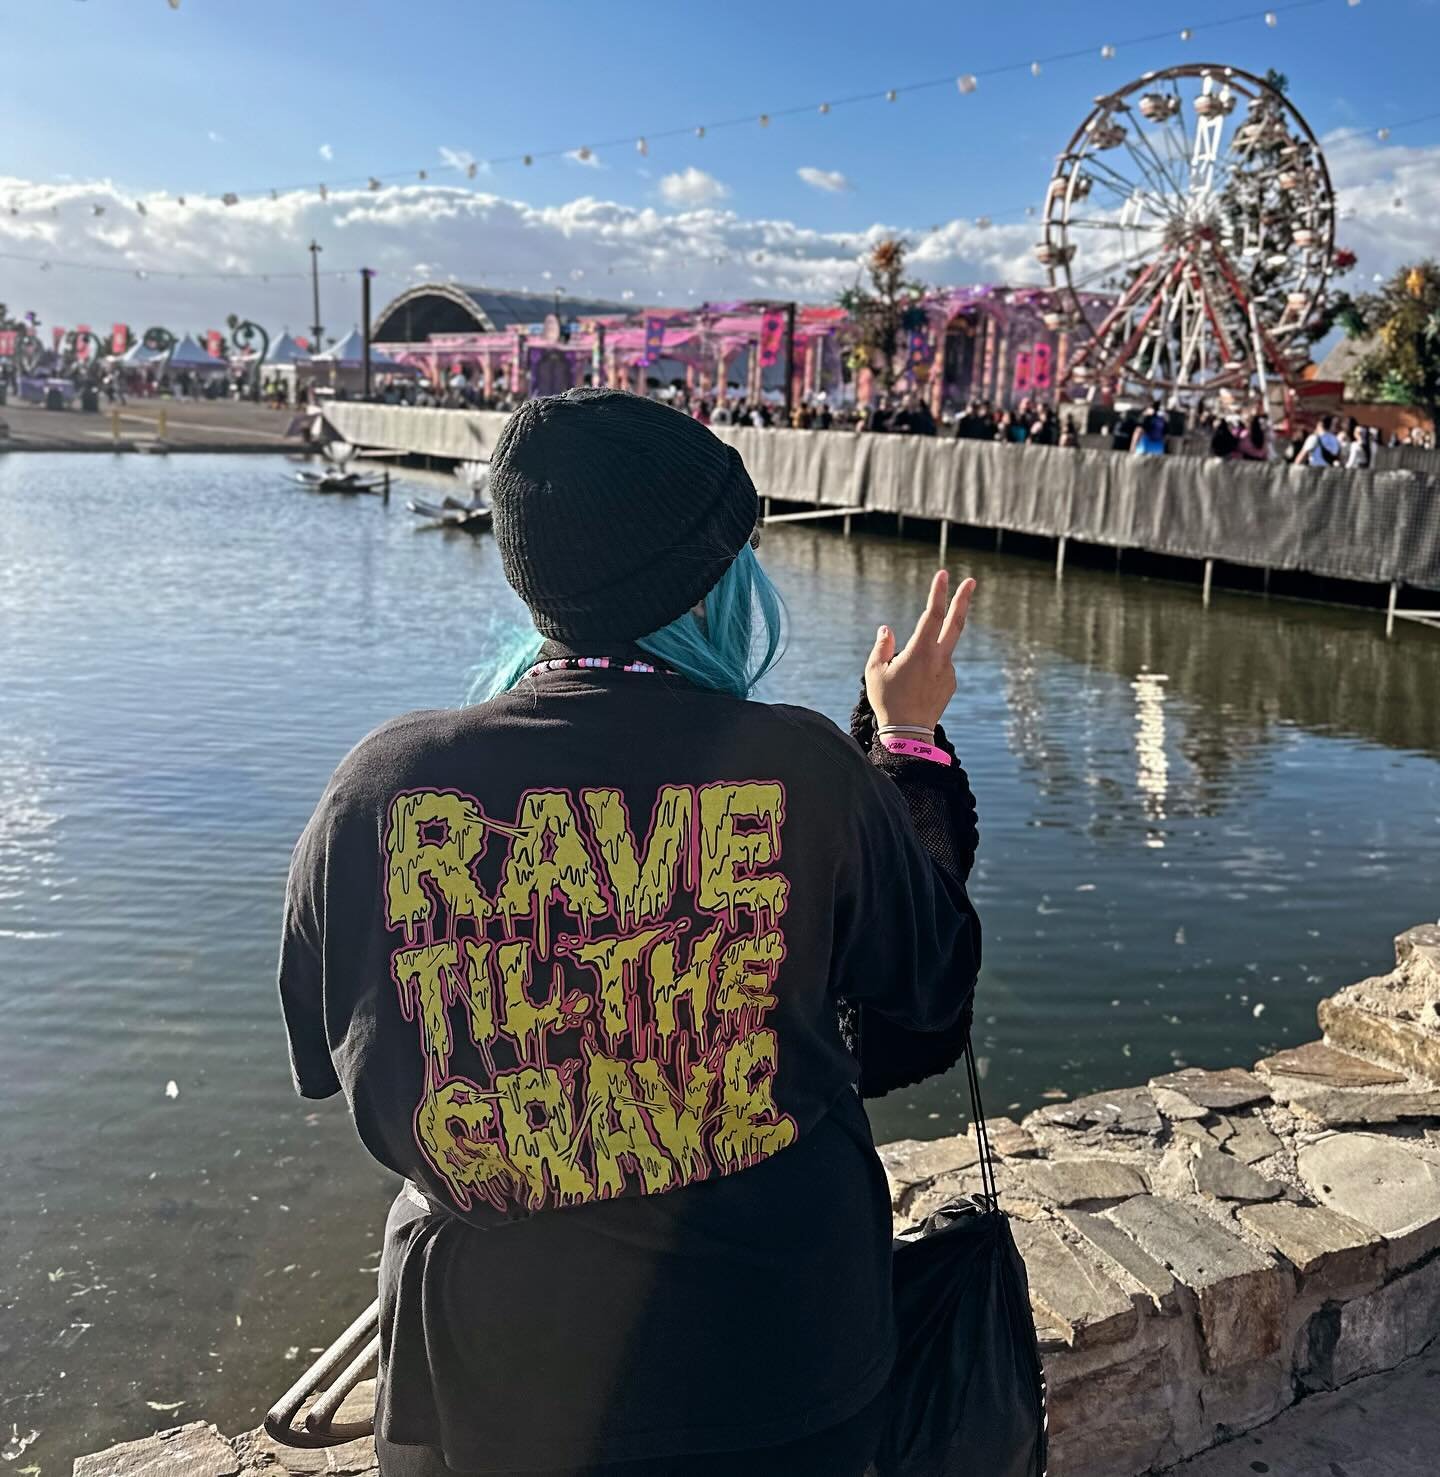 How many more days till EDC? 🎡✨
Order your shirt today to check an outfit off the list ✔️
.
.
.
. 
#smallbusiness #ravewear #edmclothing #edclv #edclasvegas2024 #mensravewear #ravers